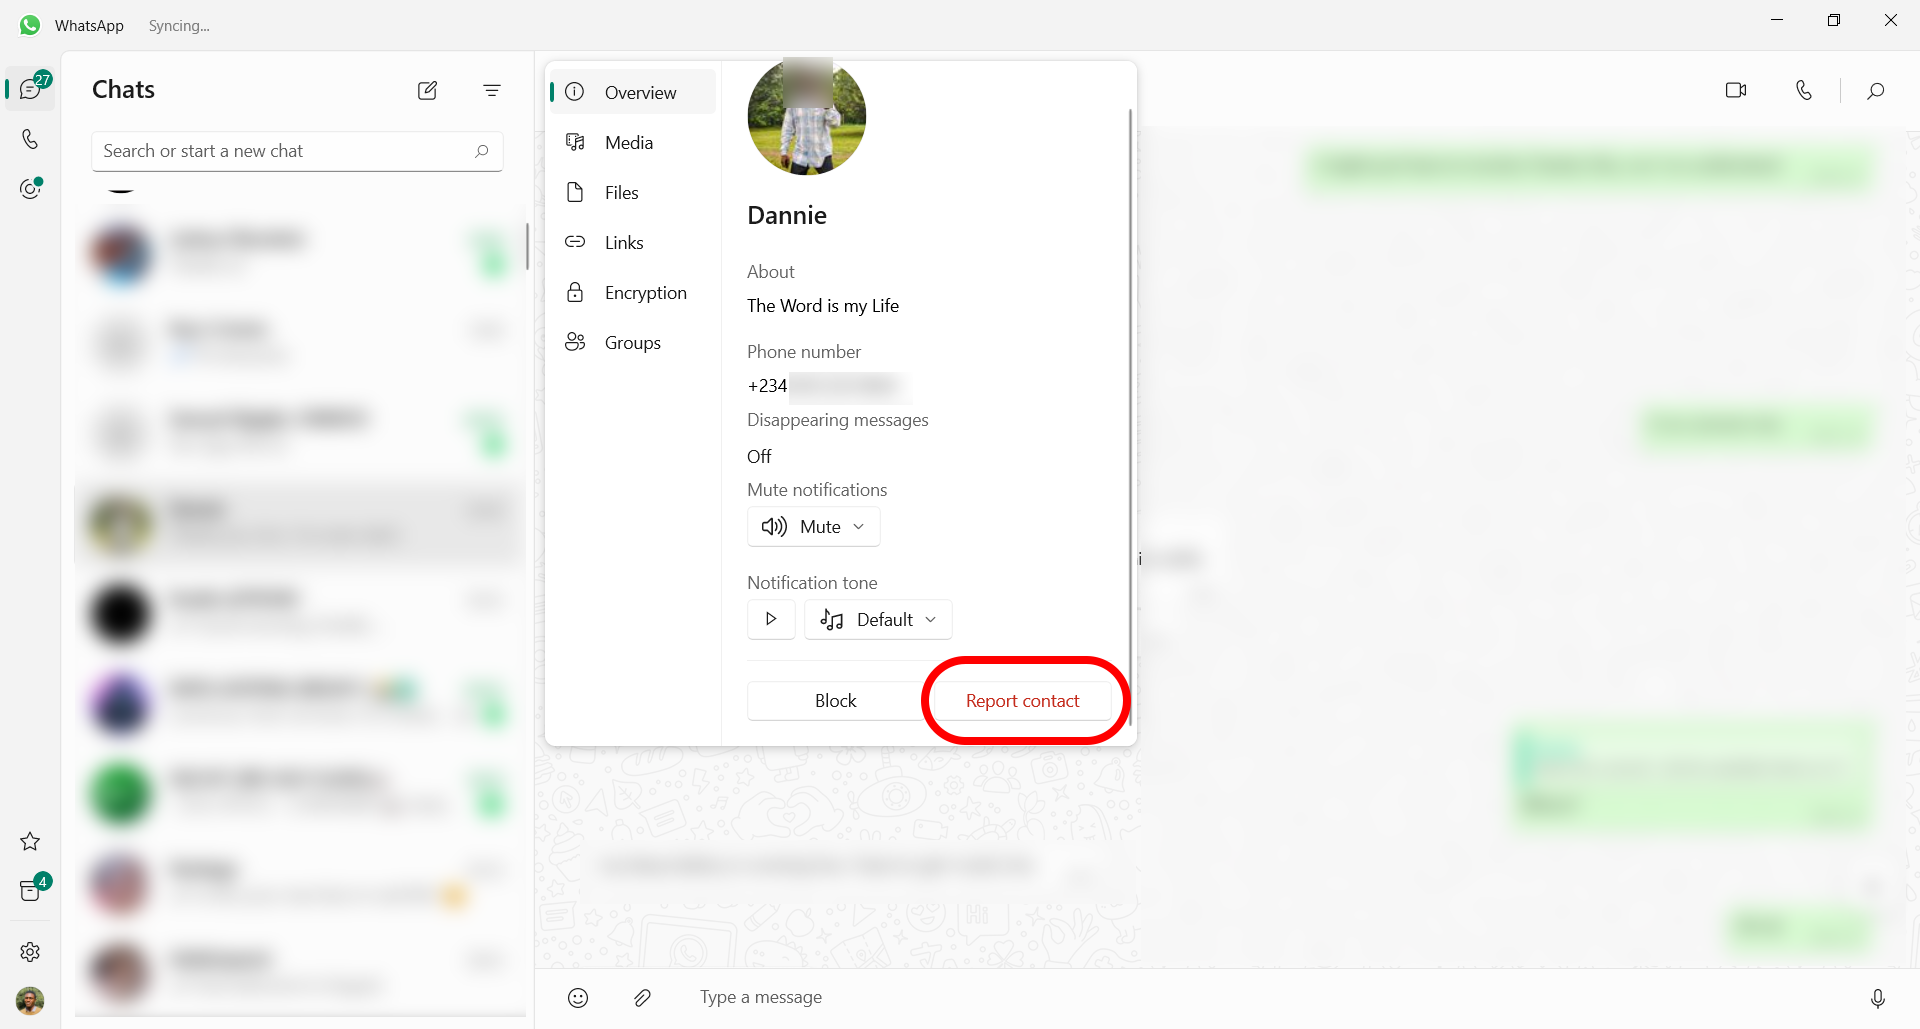 Reporting a contact from the overview menu in WhatsApp desktop